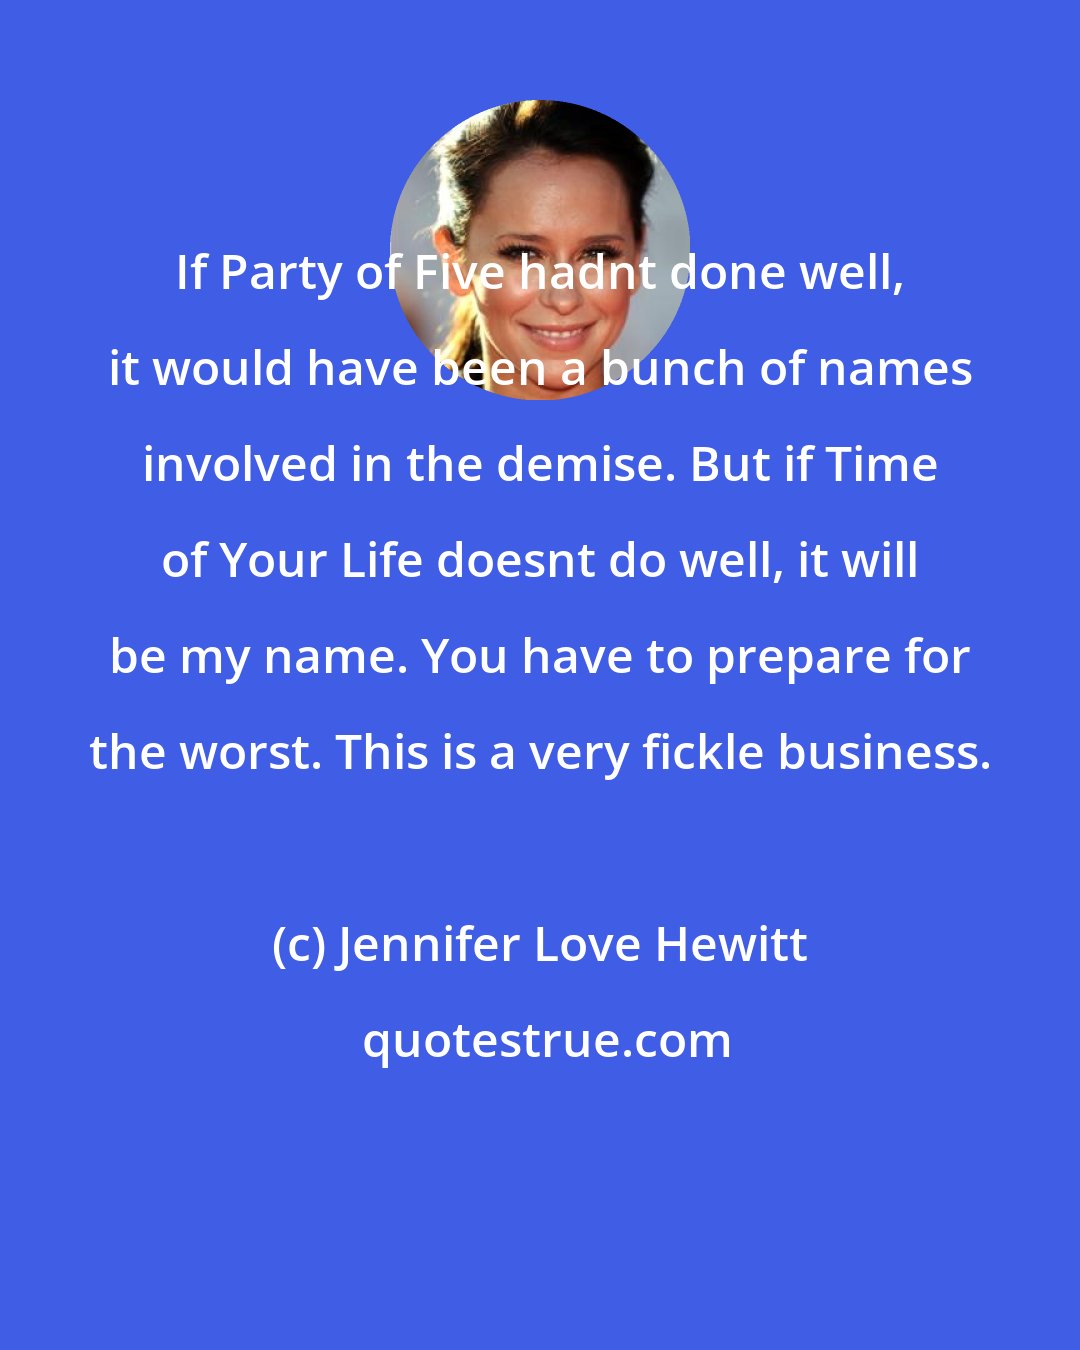 Jennifer Love Hewitt: If Party of Five hadnt done well, it would have been a bunch of names involved in the demise. But if Time of Your Life doesnt do well, it will be my name. You have to prepare for the worst. This is a very fickle business.